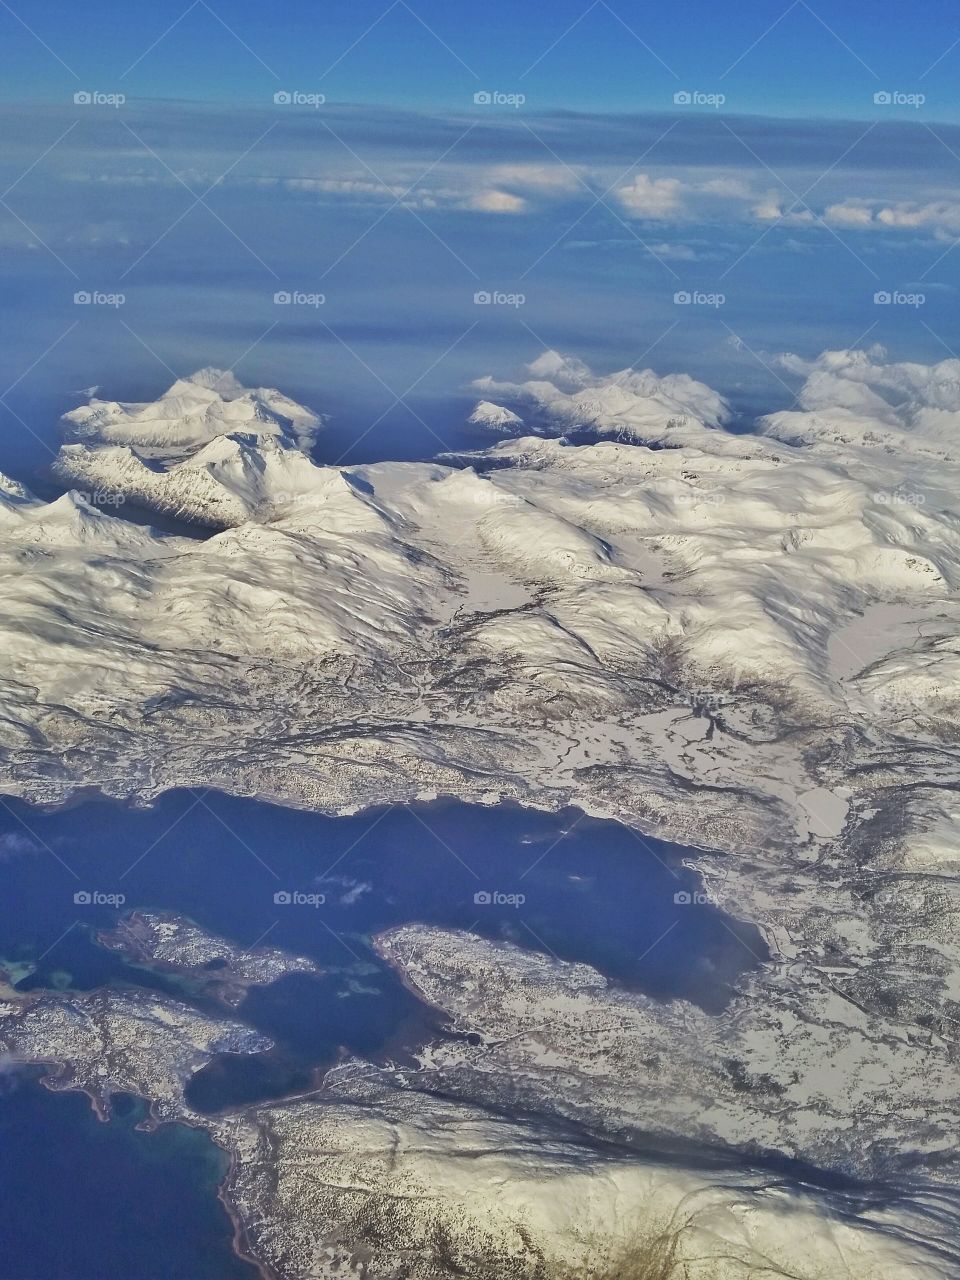 Above the clouds. On my trip to Tromsø, Norway